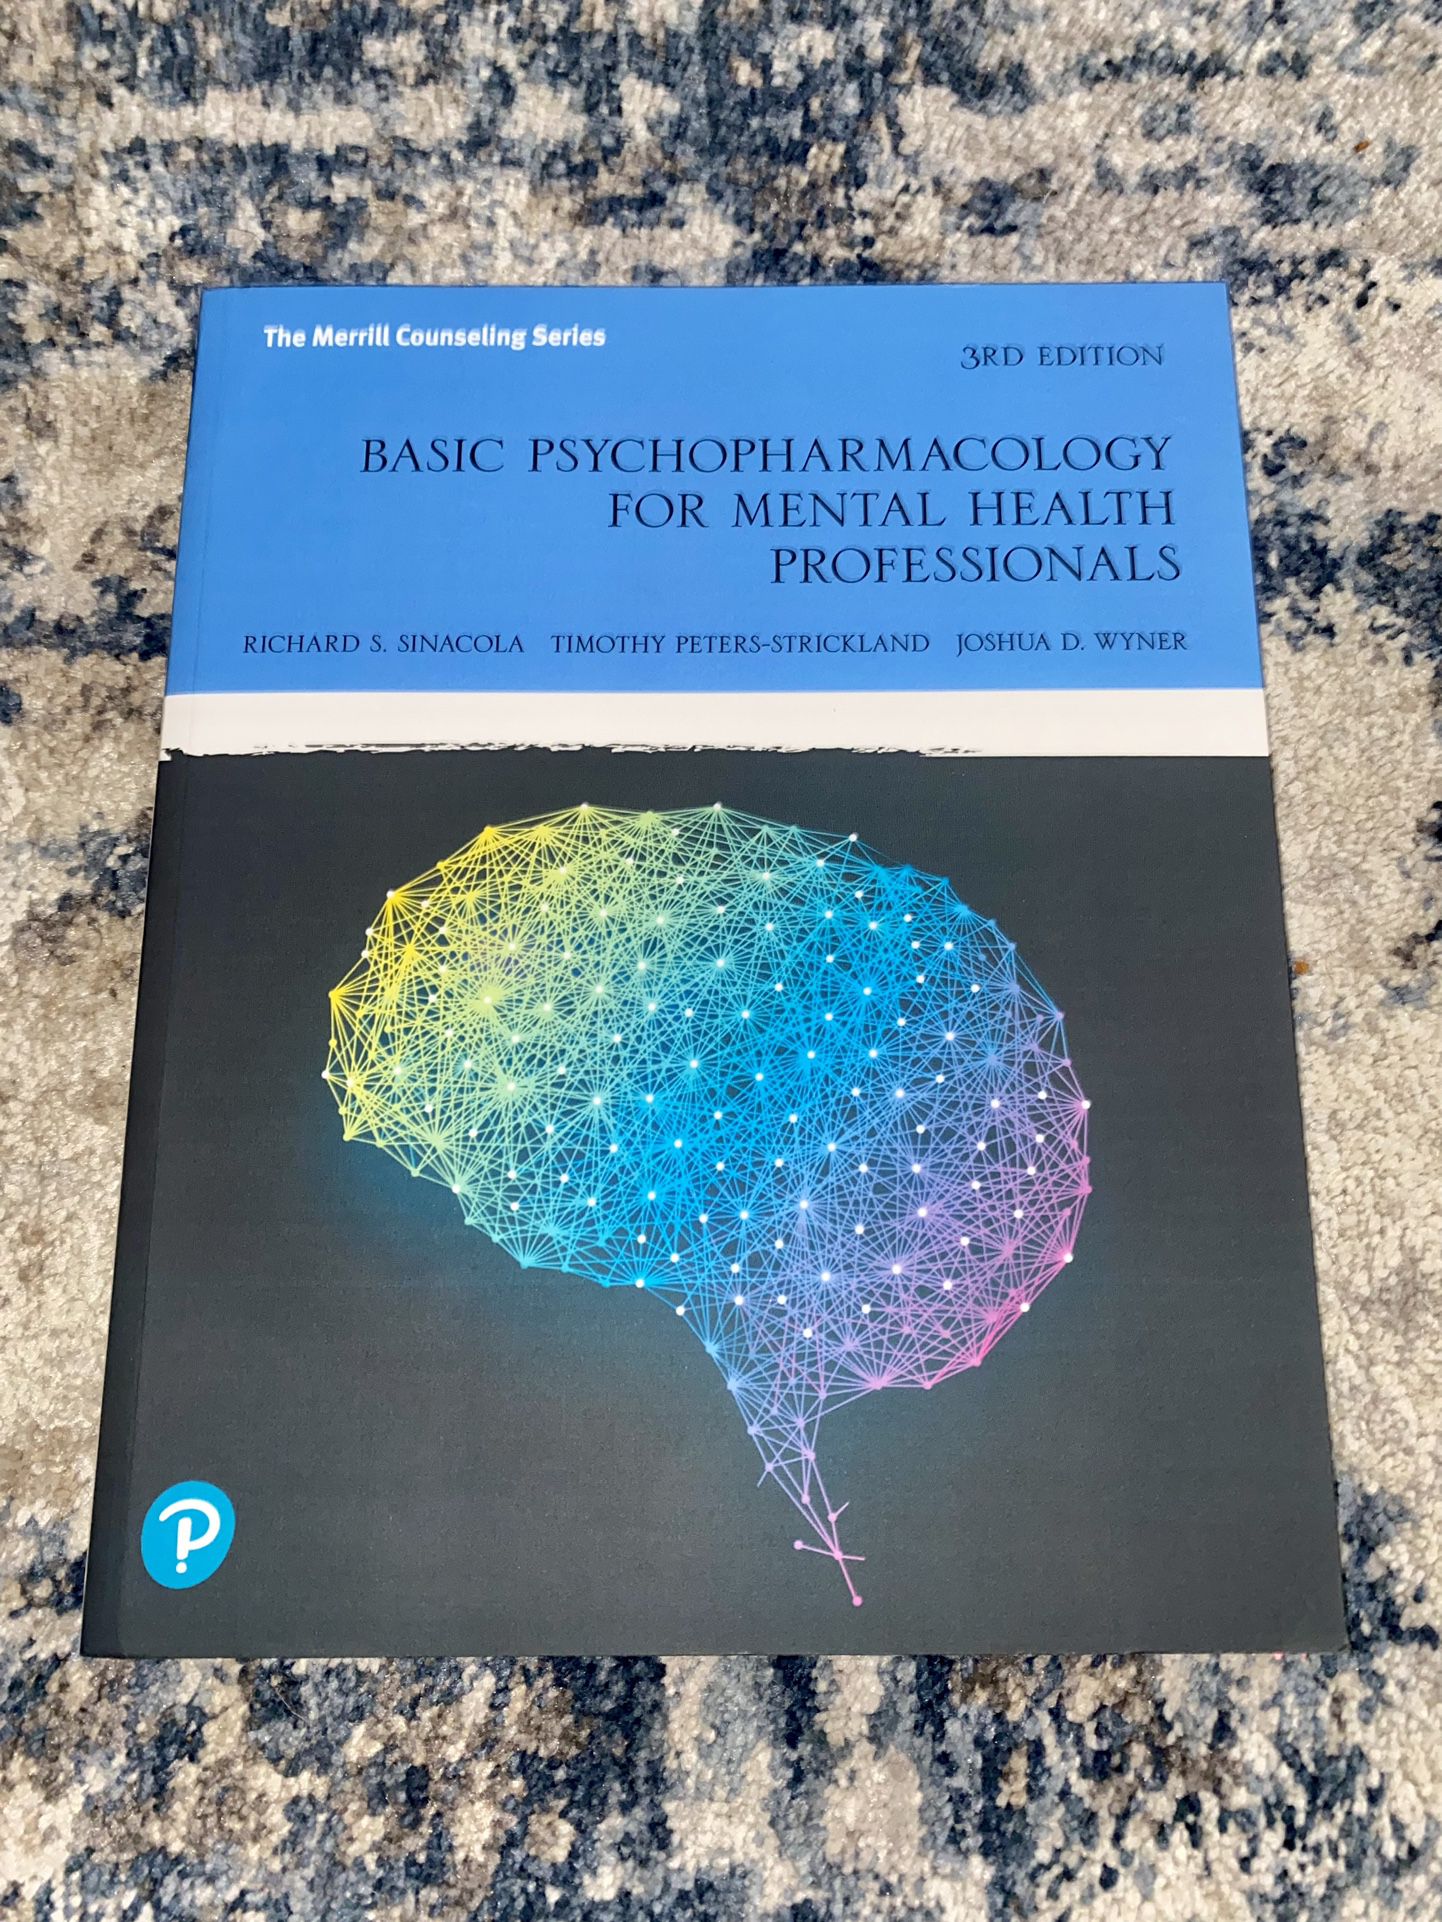 Basic Psychopharmacology for Mental Health Professionals 3rd Edition NEW